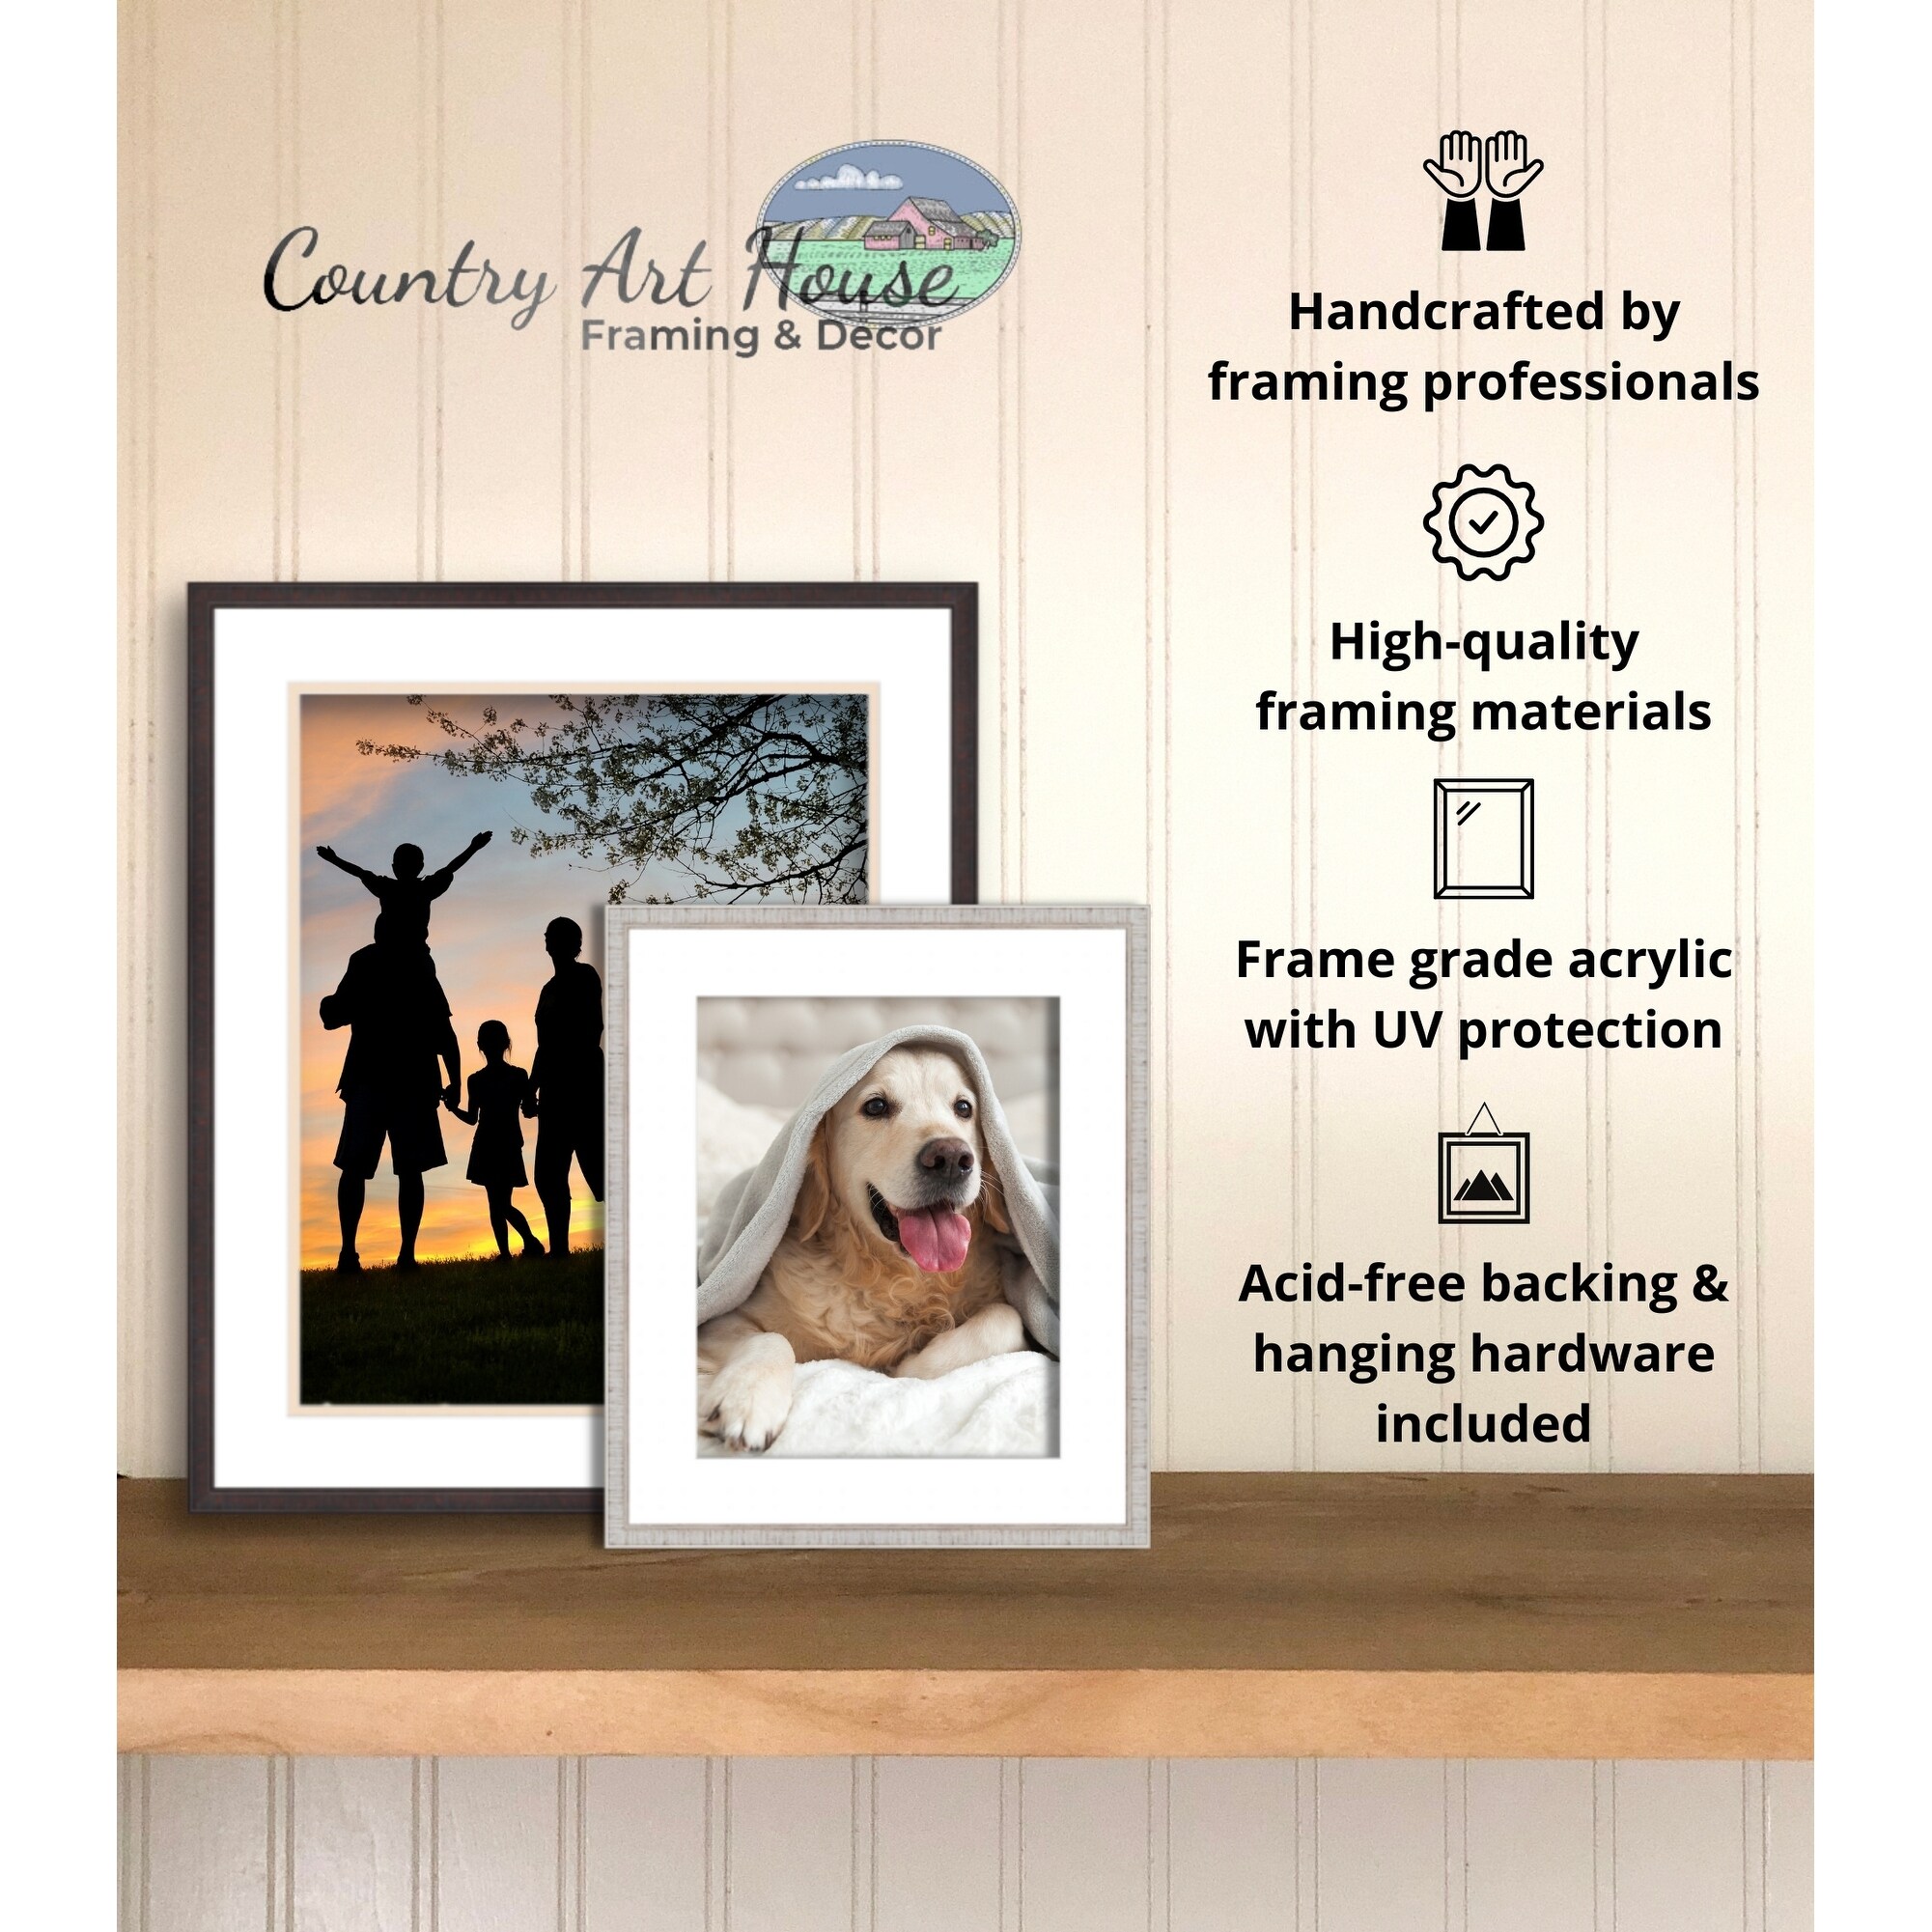 With Acrylic Front and Foam Board Backing 7x20 Grey Barnwood Picture Frame 